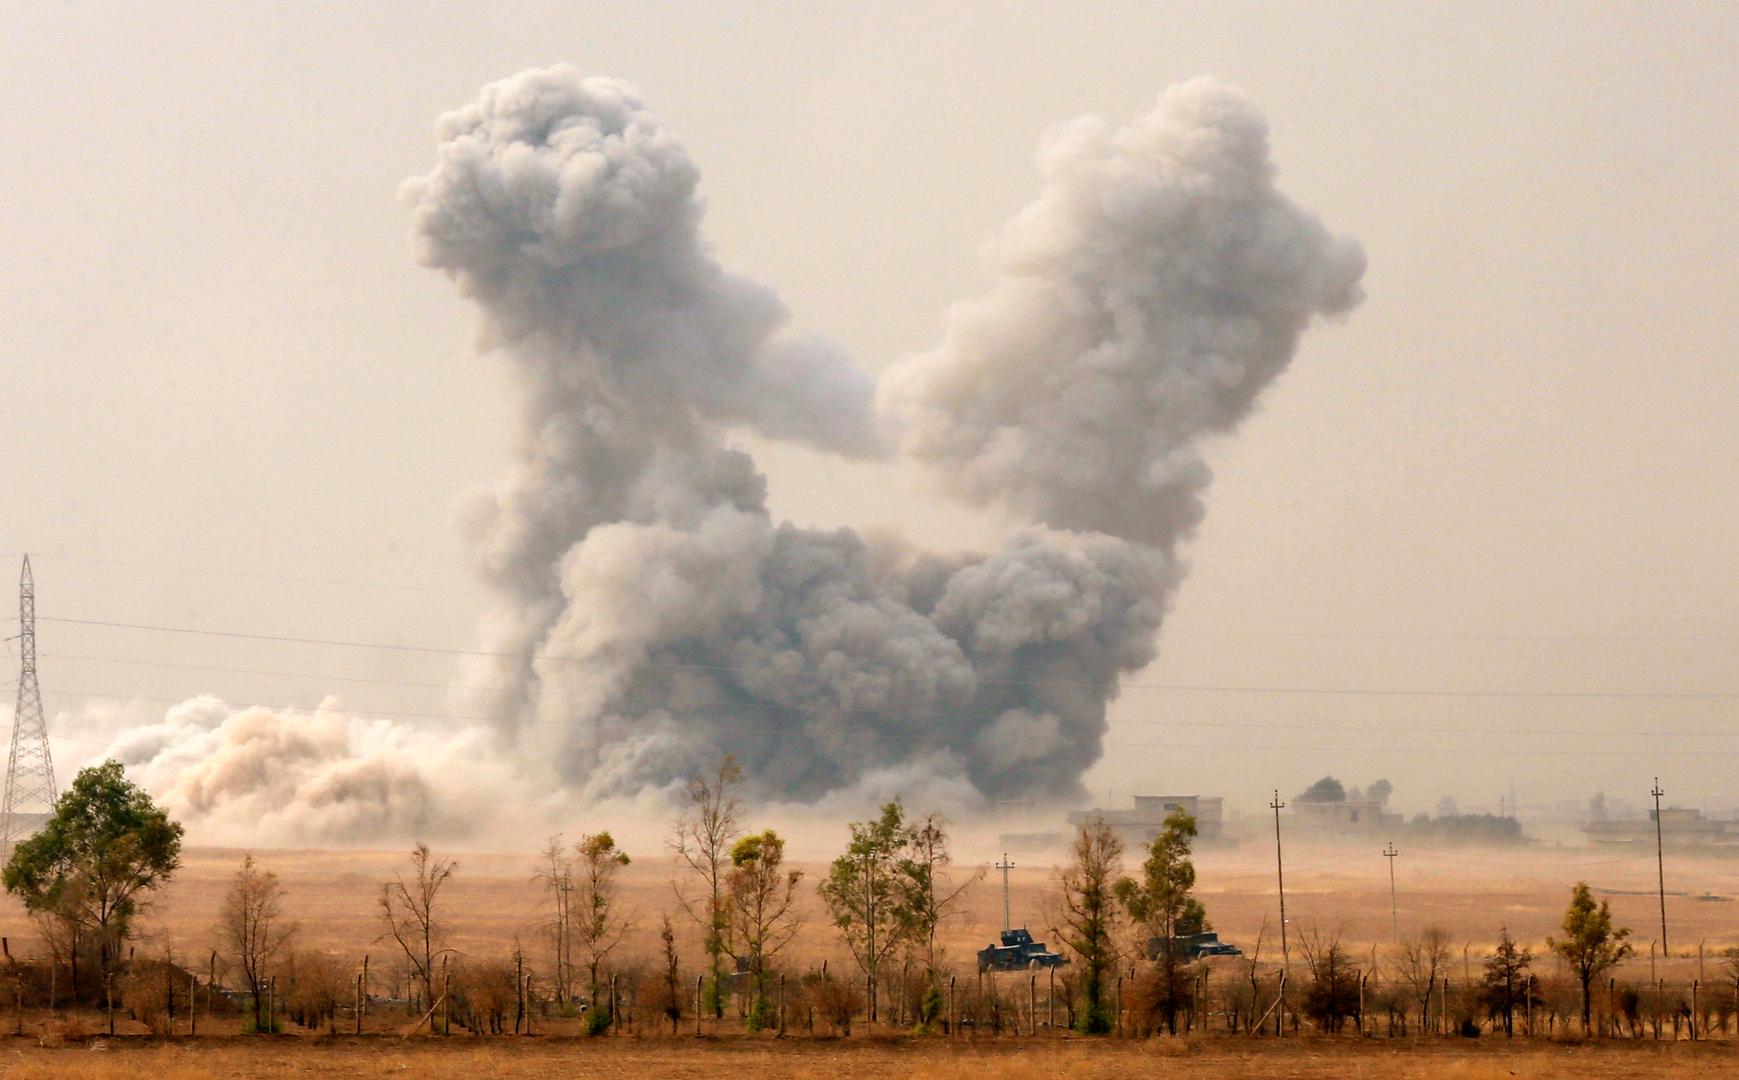 Smoke rises after a U.S. airstrike during the operation against Islamic State militants near Mosul, Iraq, October 24, 2016.